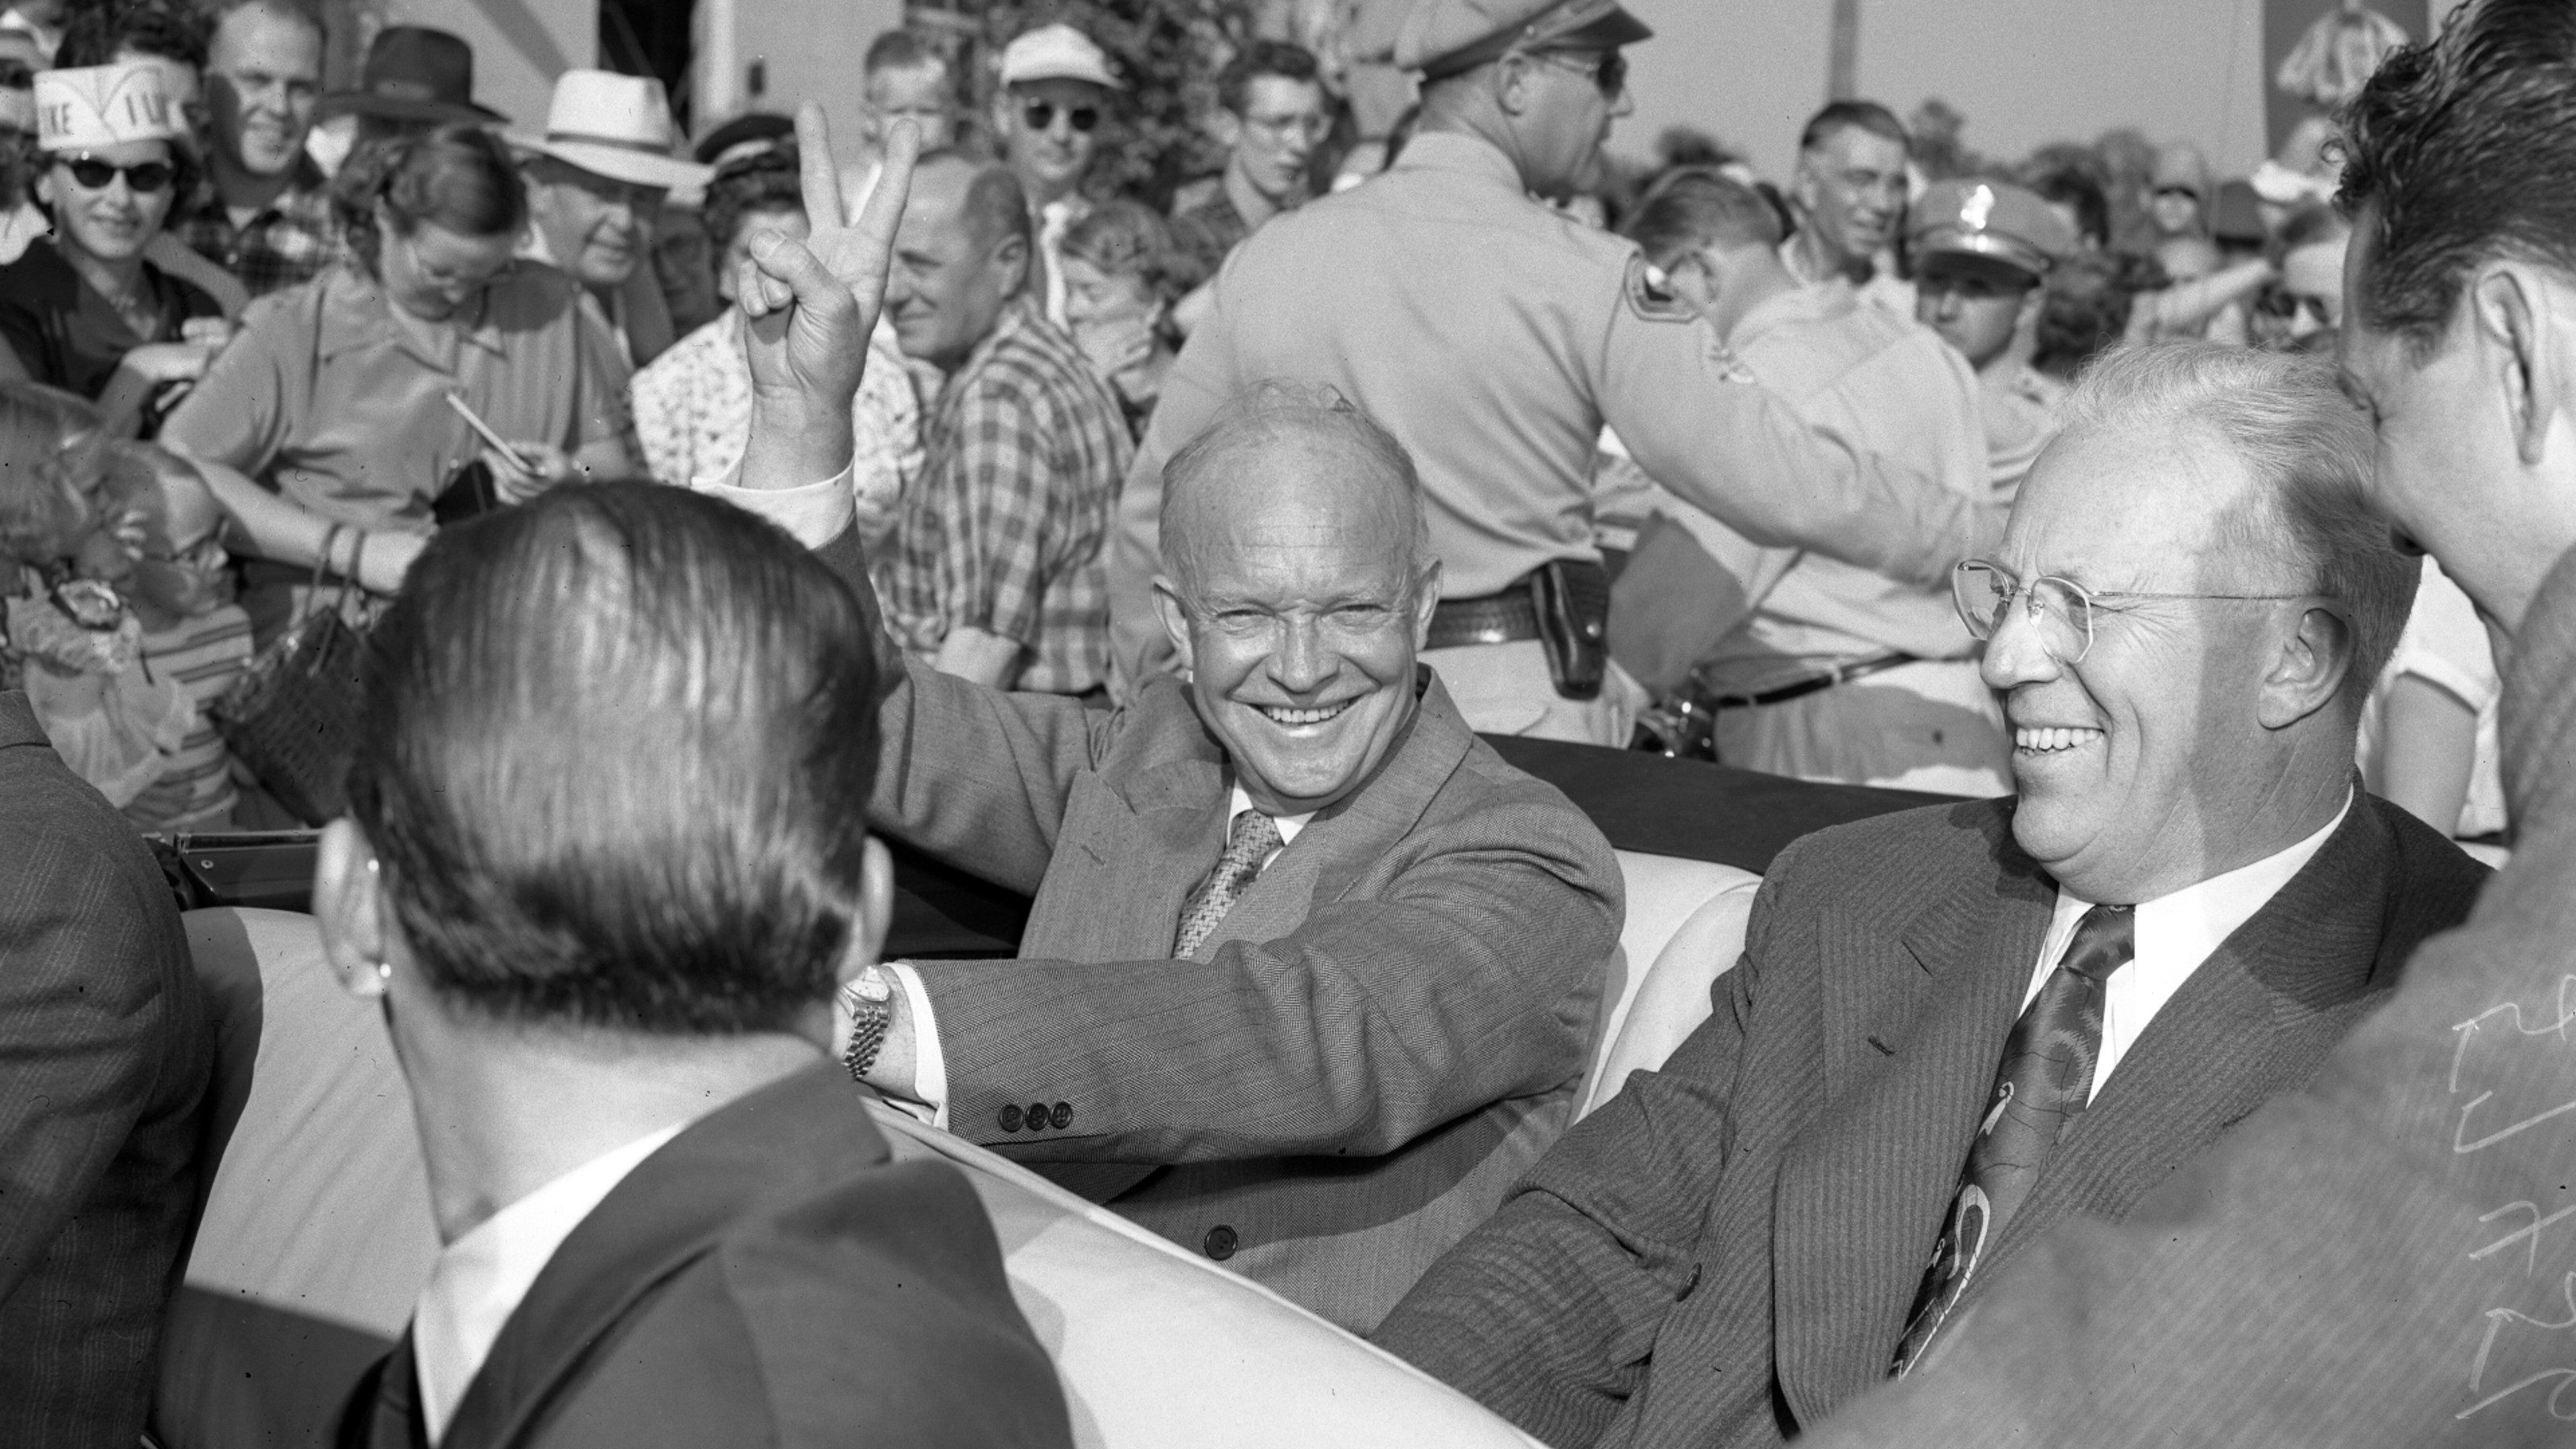 Two men smiling and riding in a convertible during a parade, surrounded by a crowd of onlookers.